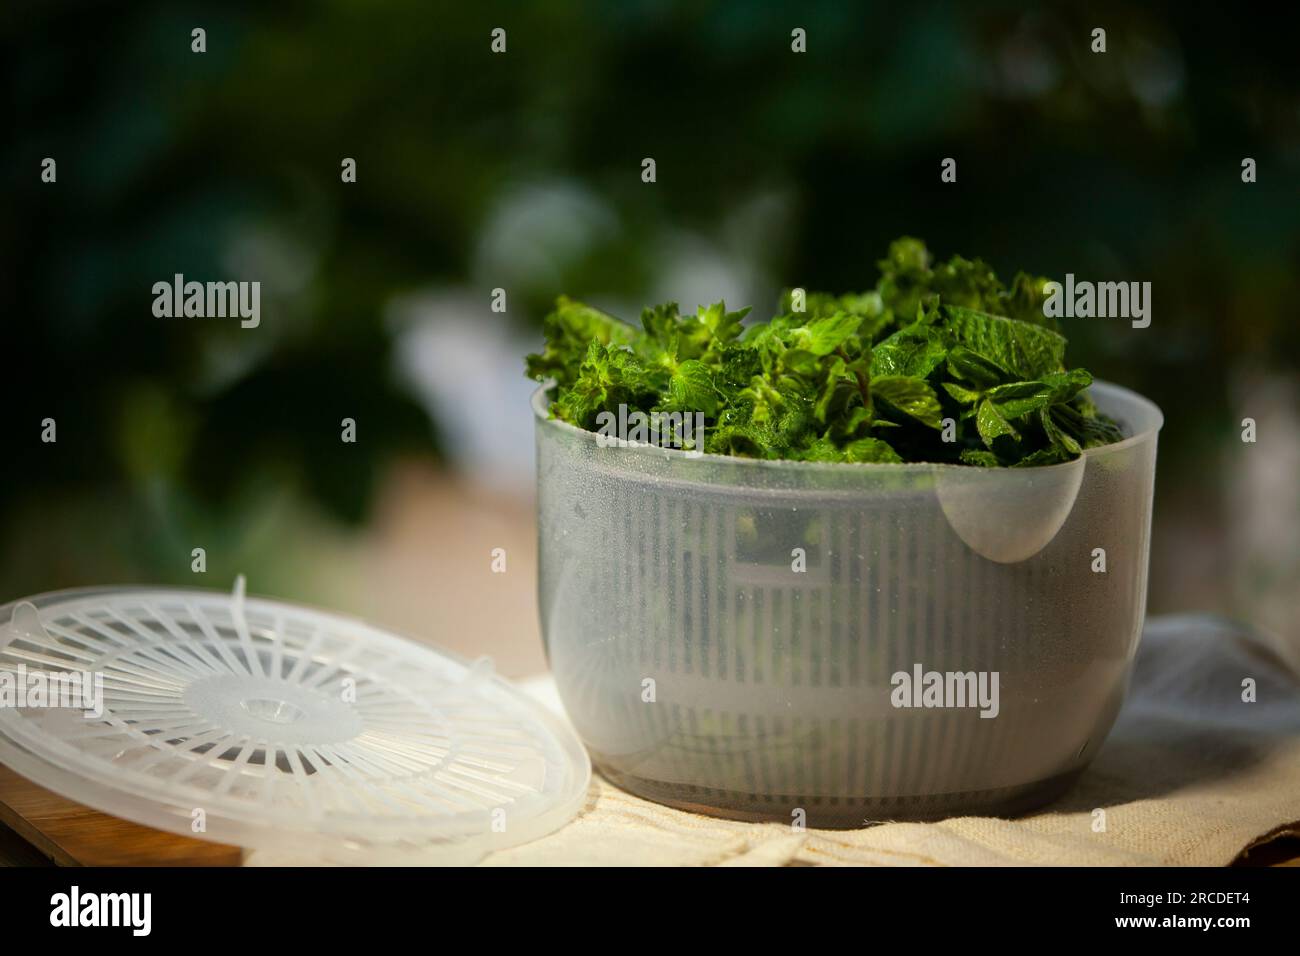 Salad spinner, also known as a salad tosser, kitchen tool used to wash and  remove excess water from mint Stock Photo - Alamy